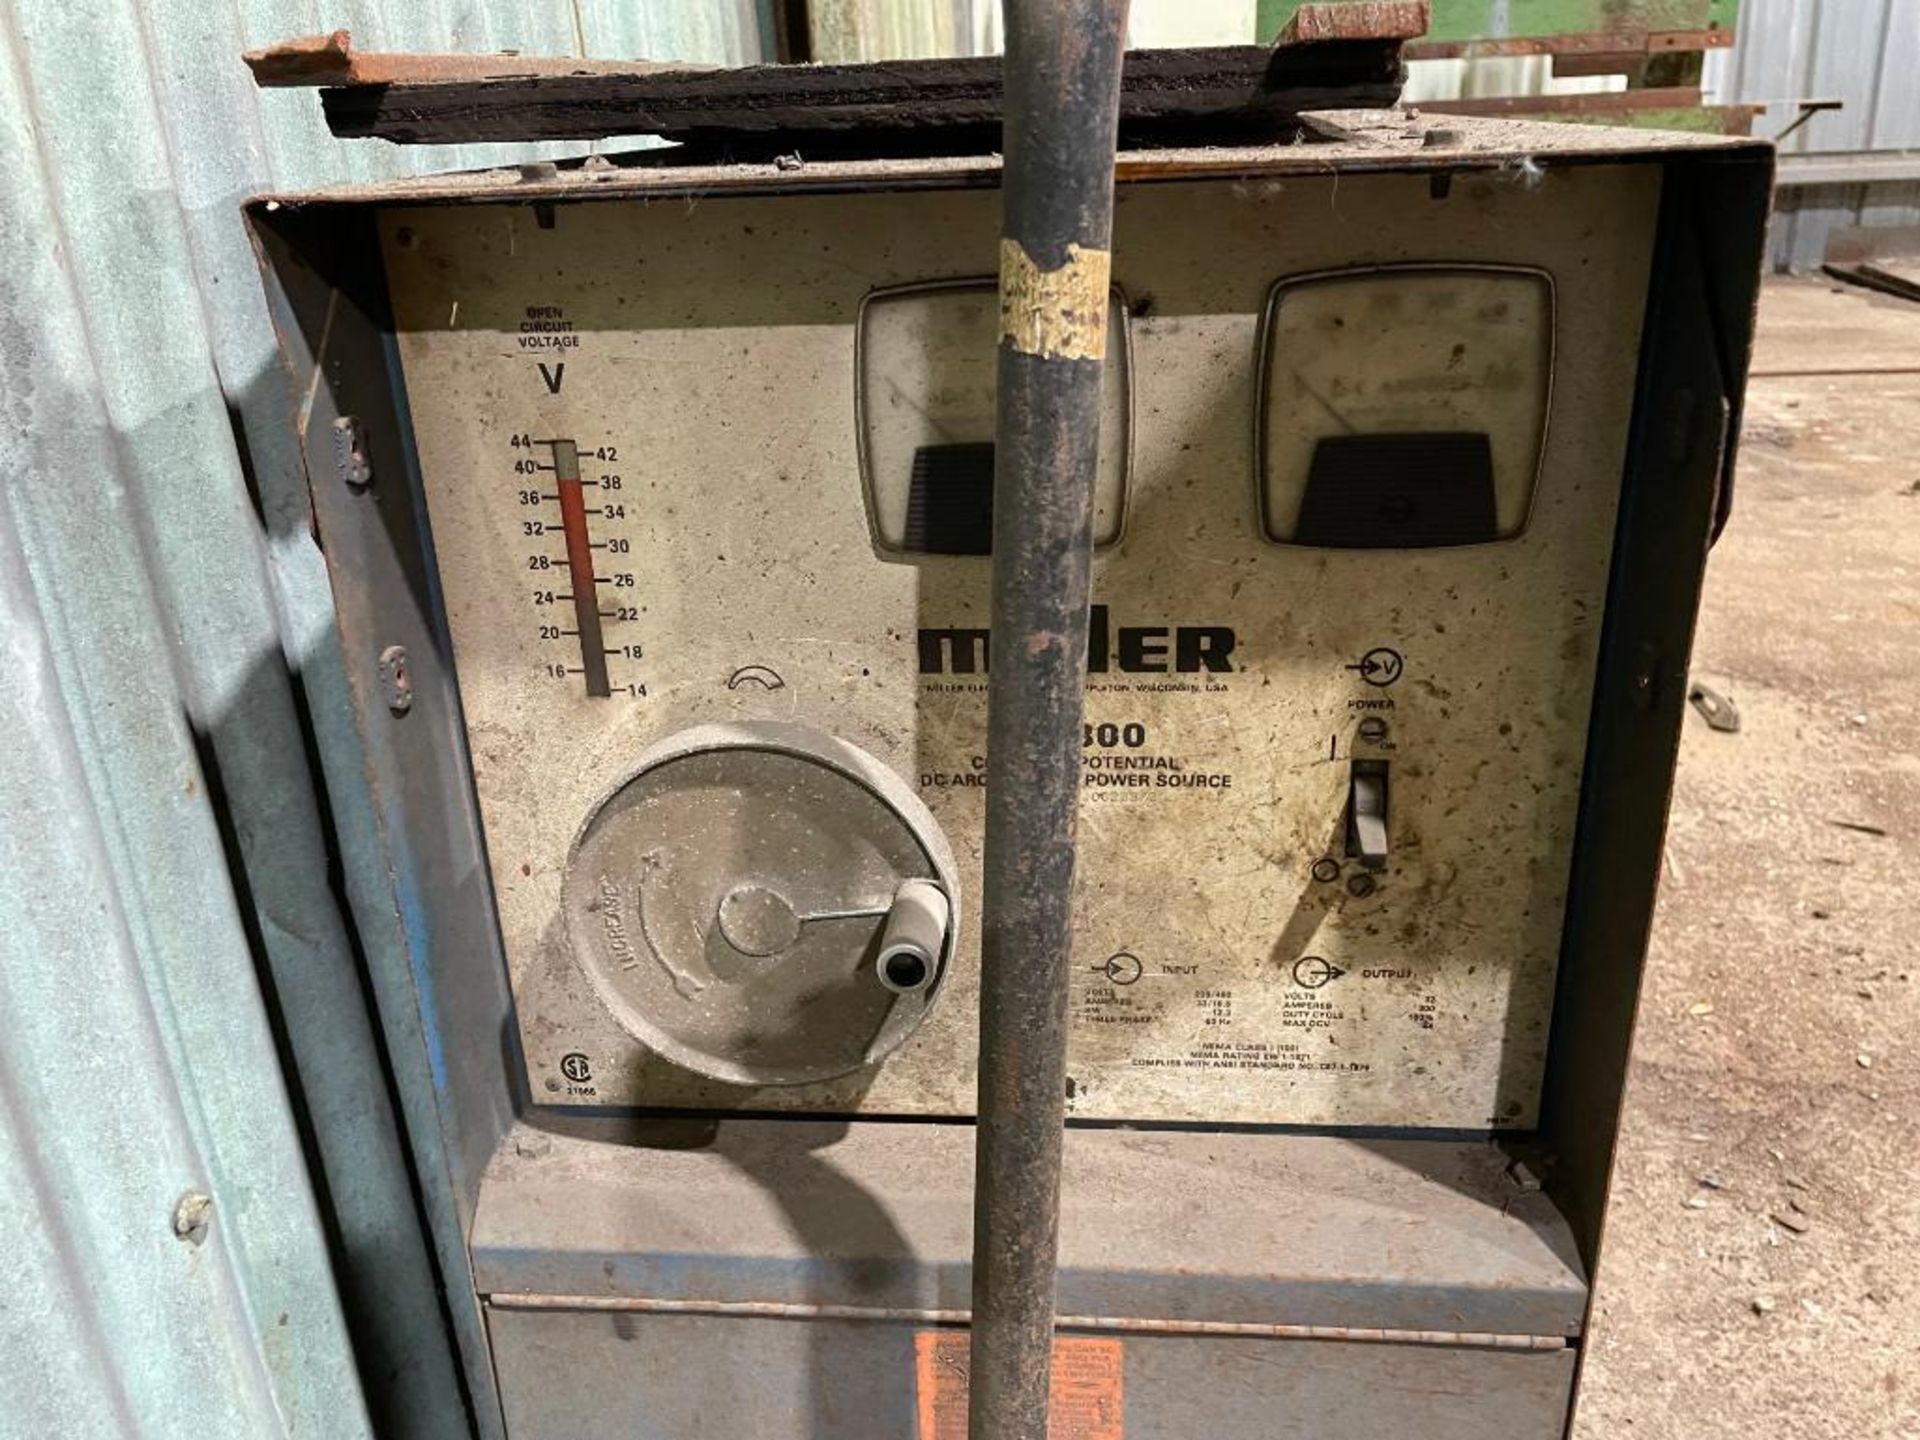 DESCRIPTION MILLER CP-300 DC ARC WELDING POWER SOURCE WELDER (NOT IN WORKING CONDITION, FOR PARTS) B - Image 5 of 5